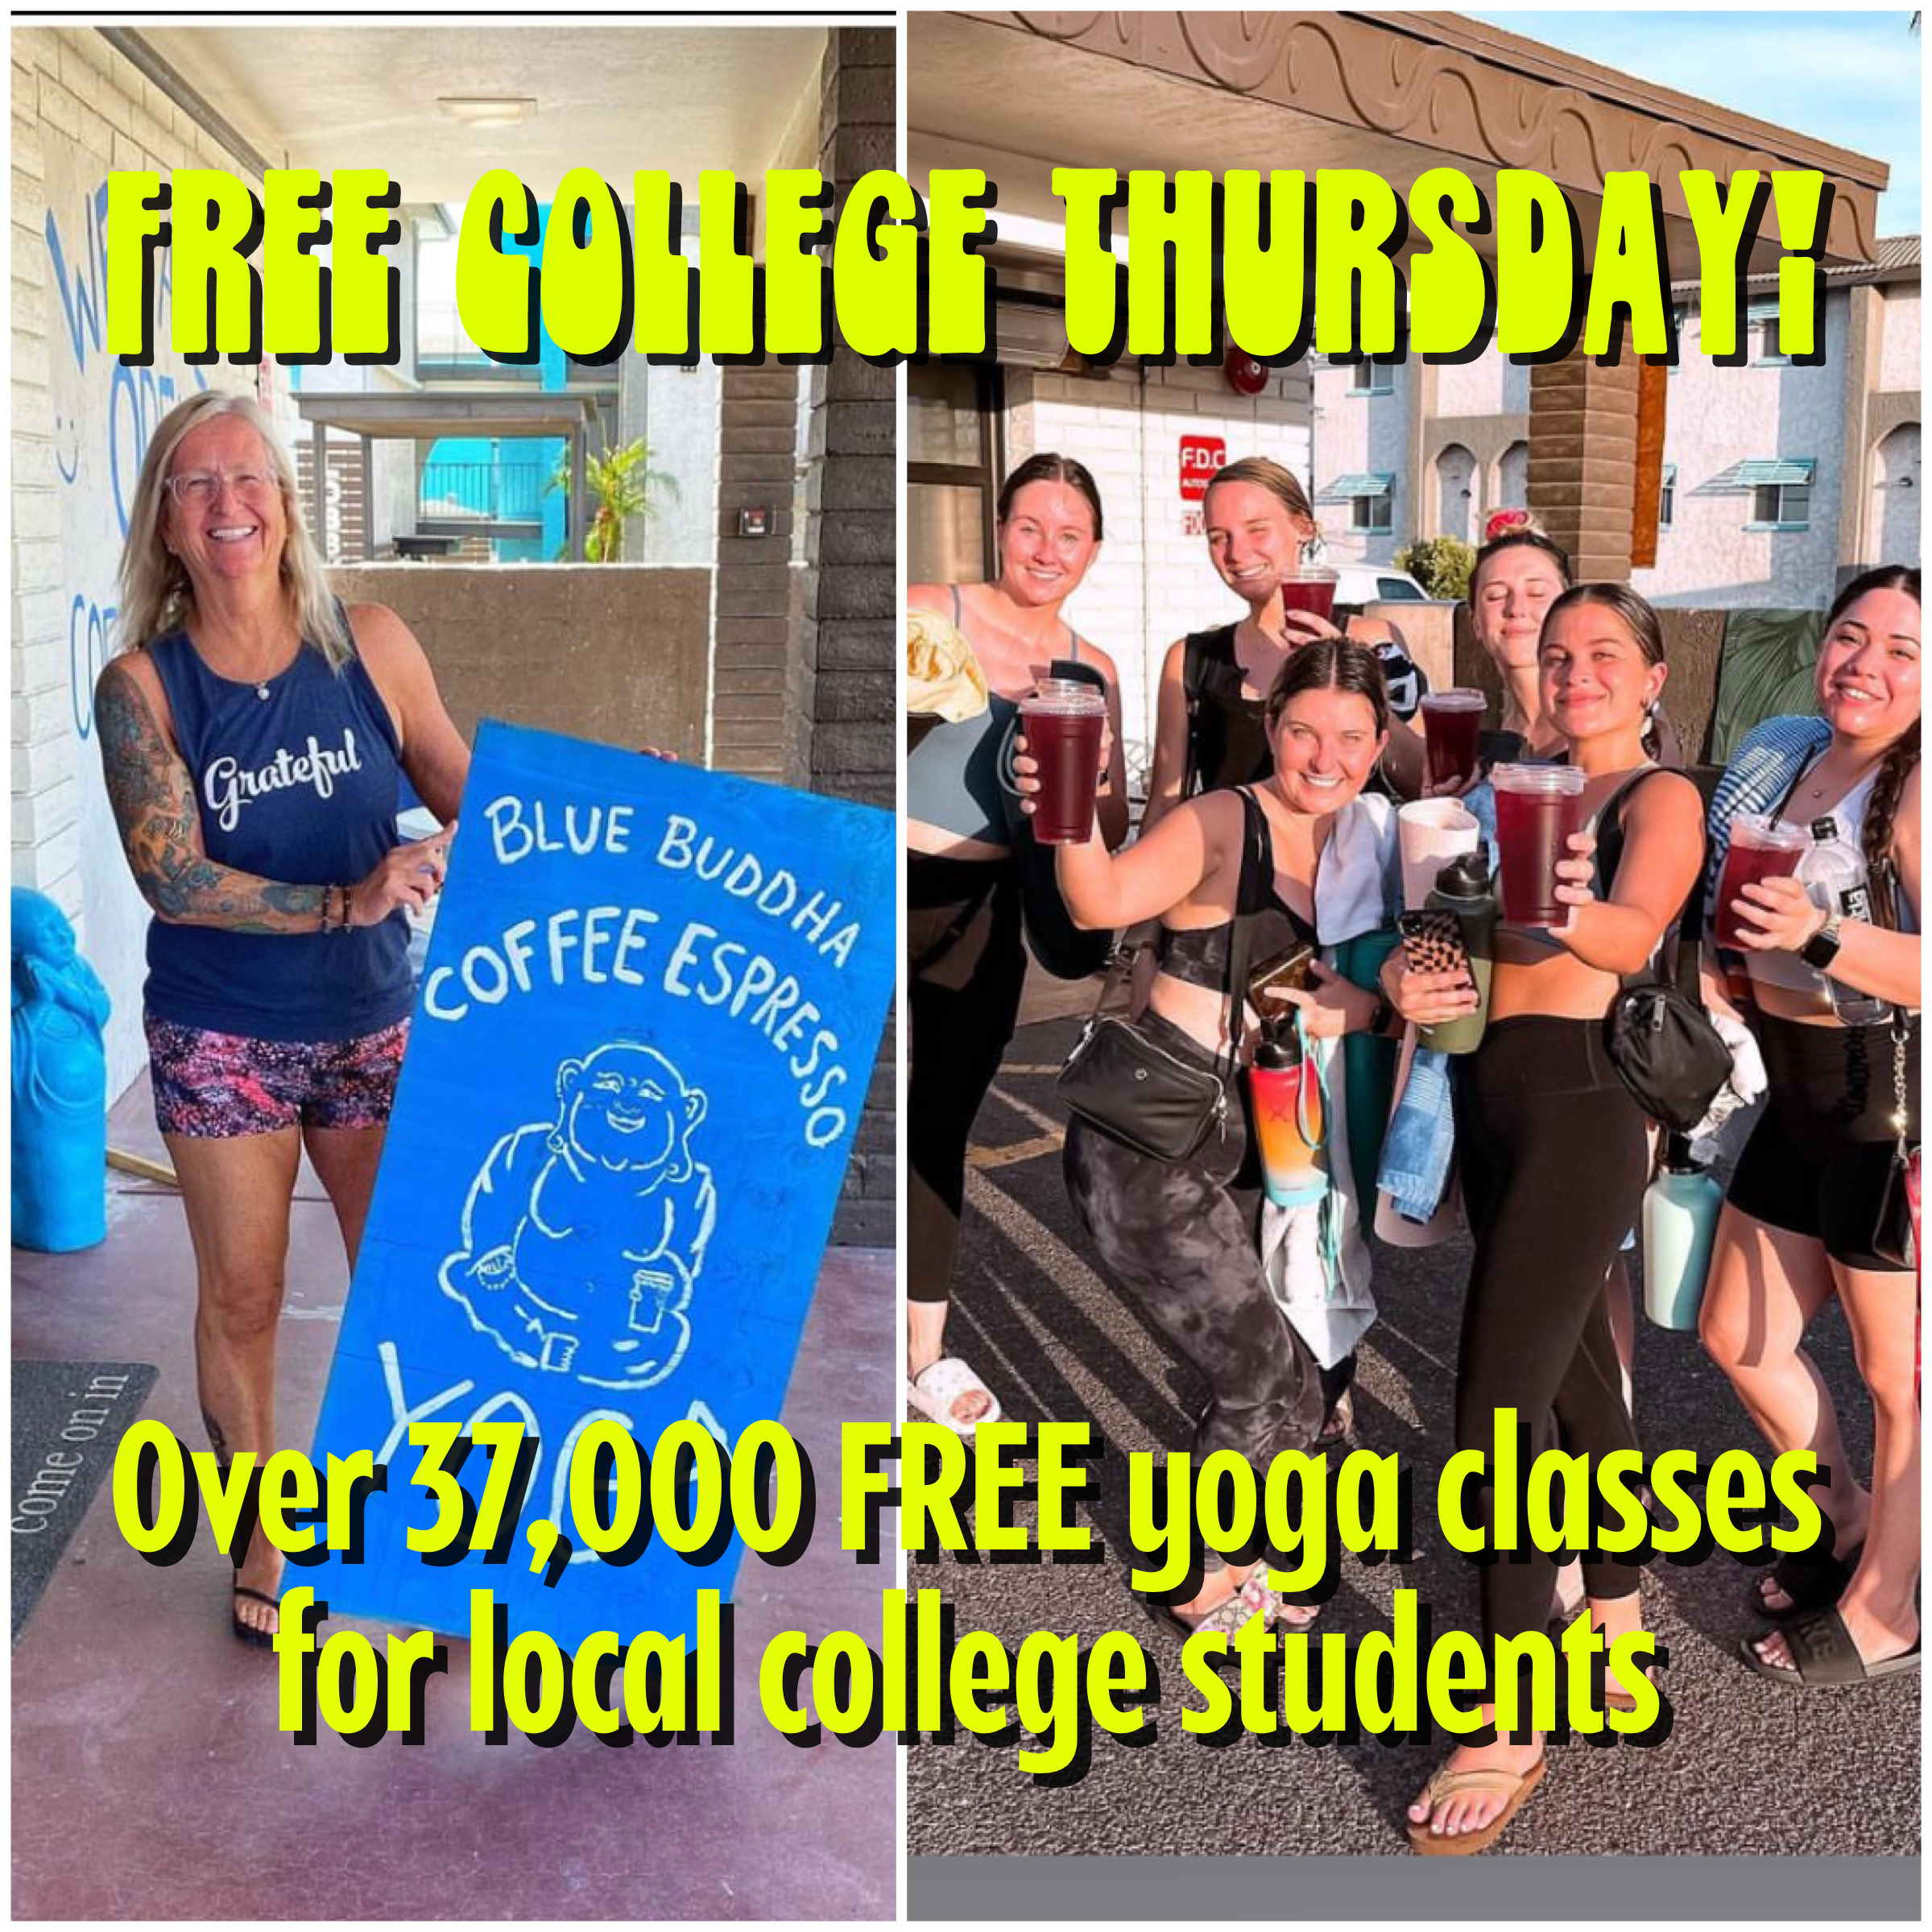 FREE YOGA FOR COLLEGE STUDENTS EVERY THURSDAY!